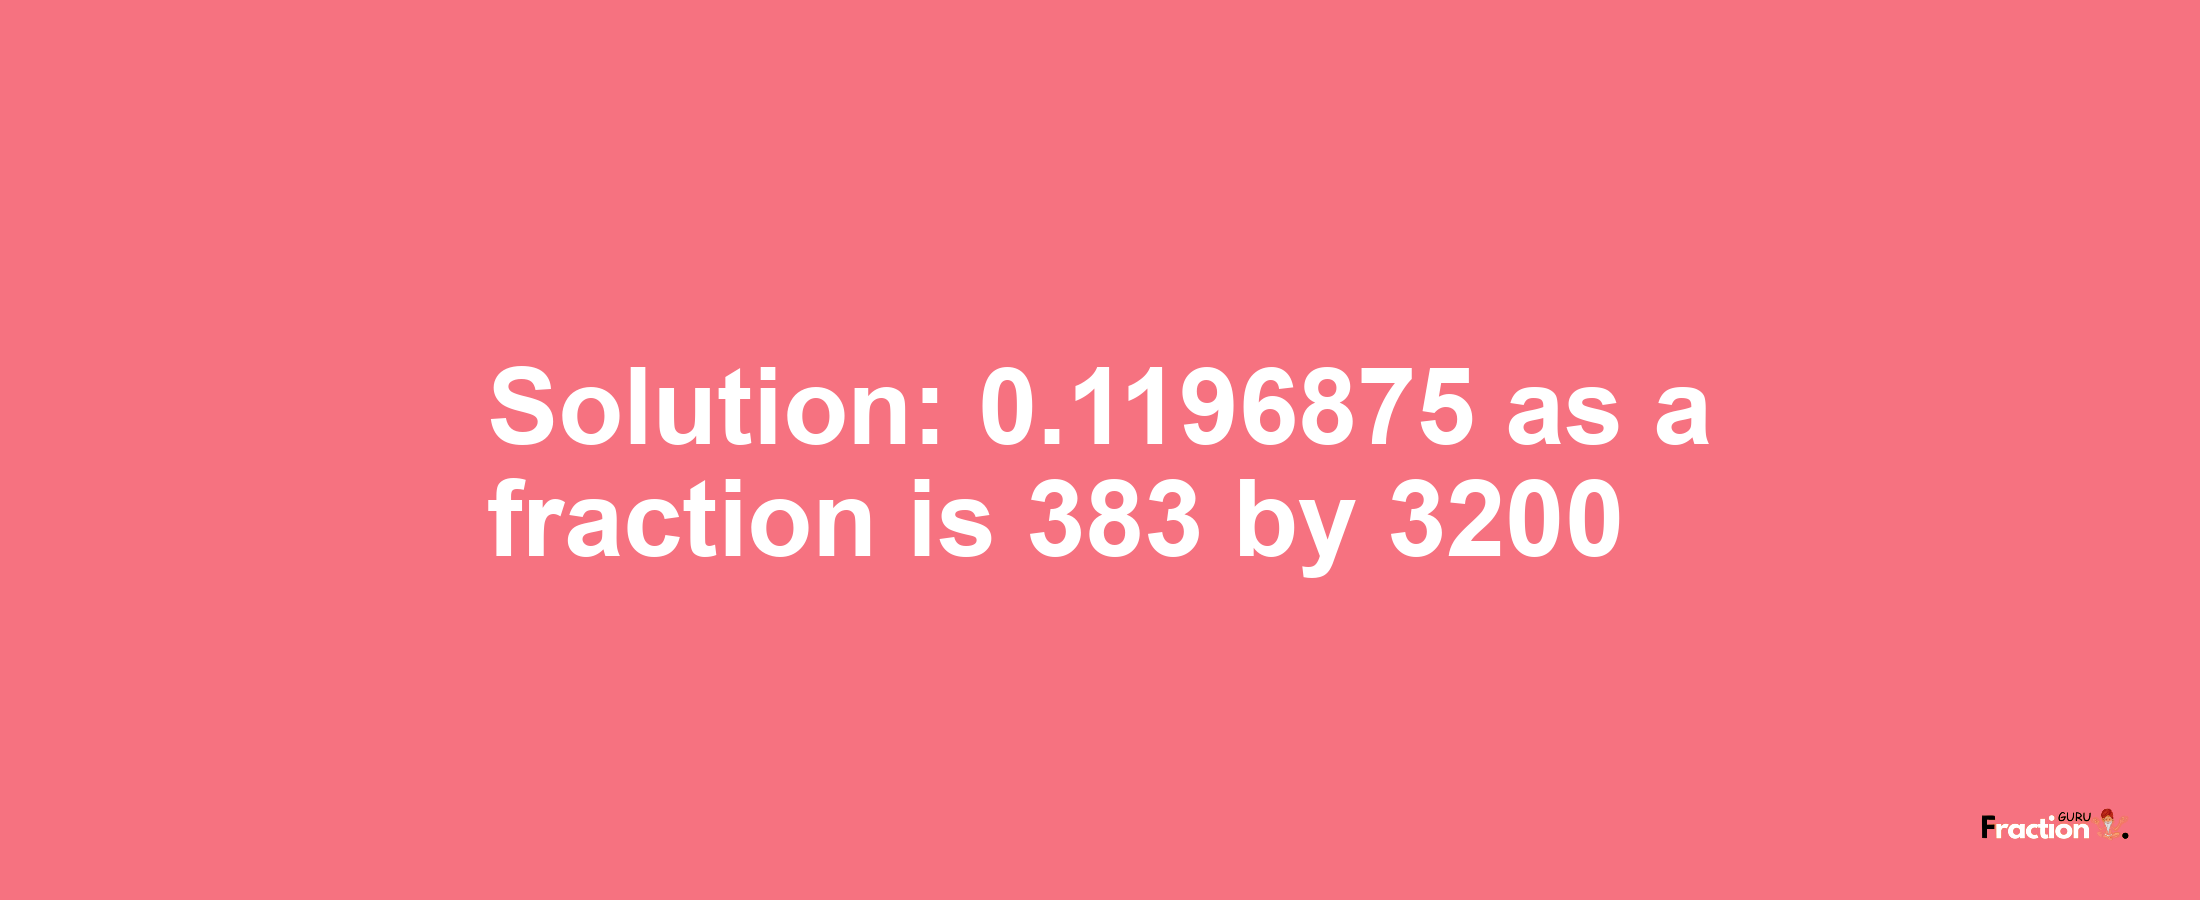 Solution:0.1196875 as a fraction is 383/3200